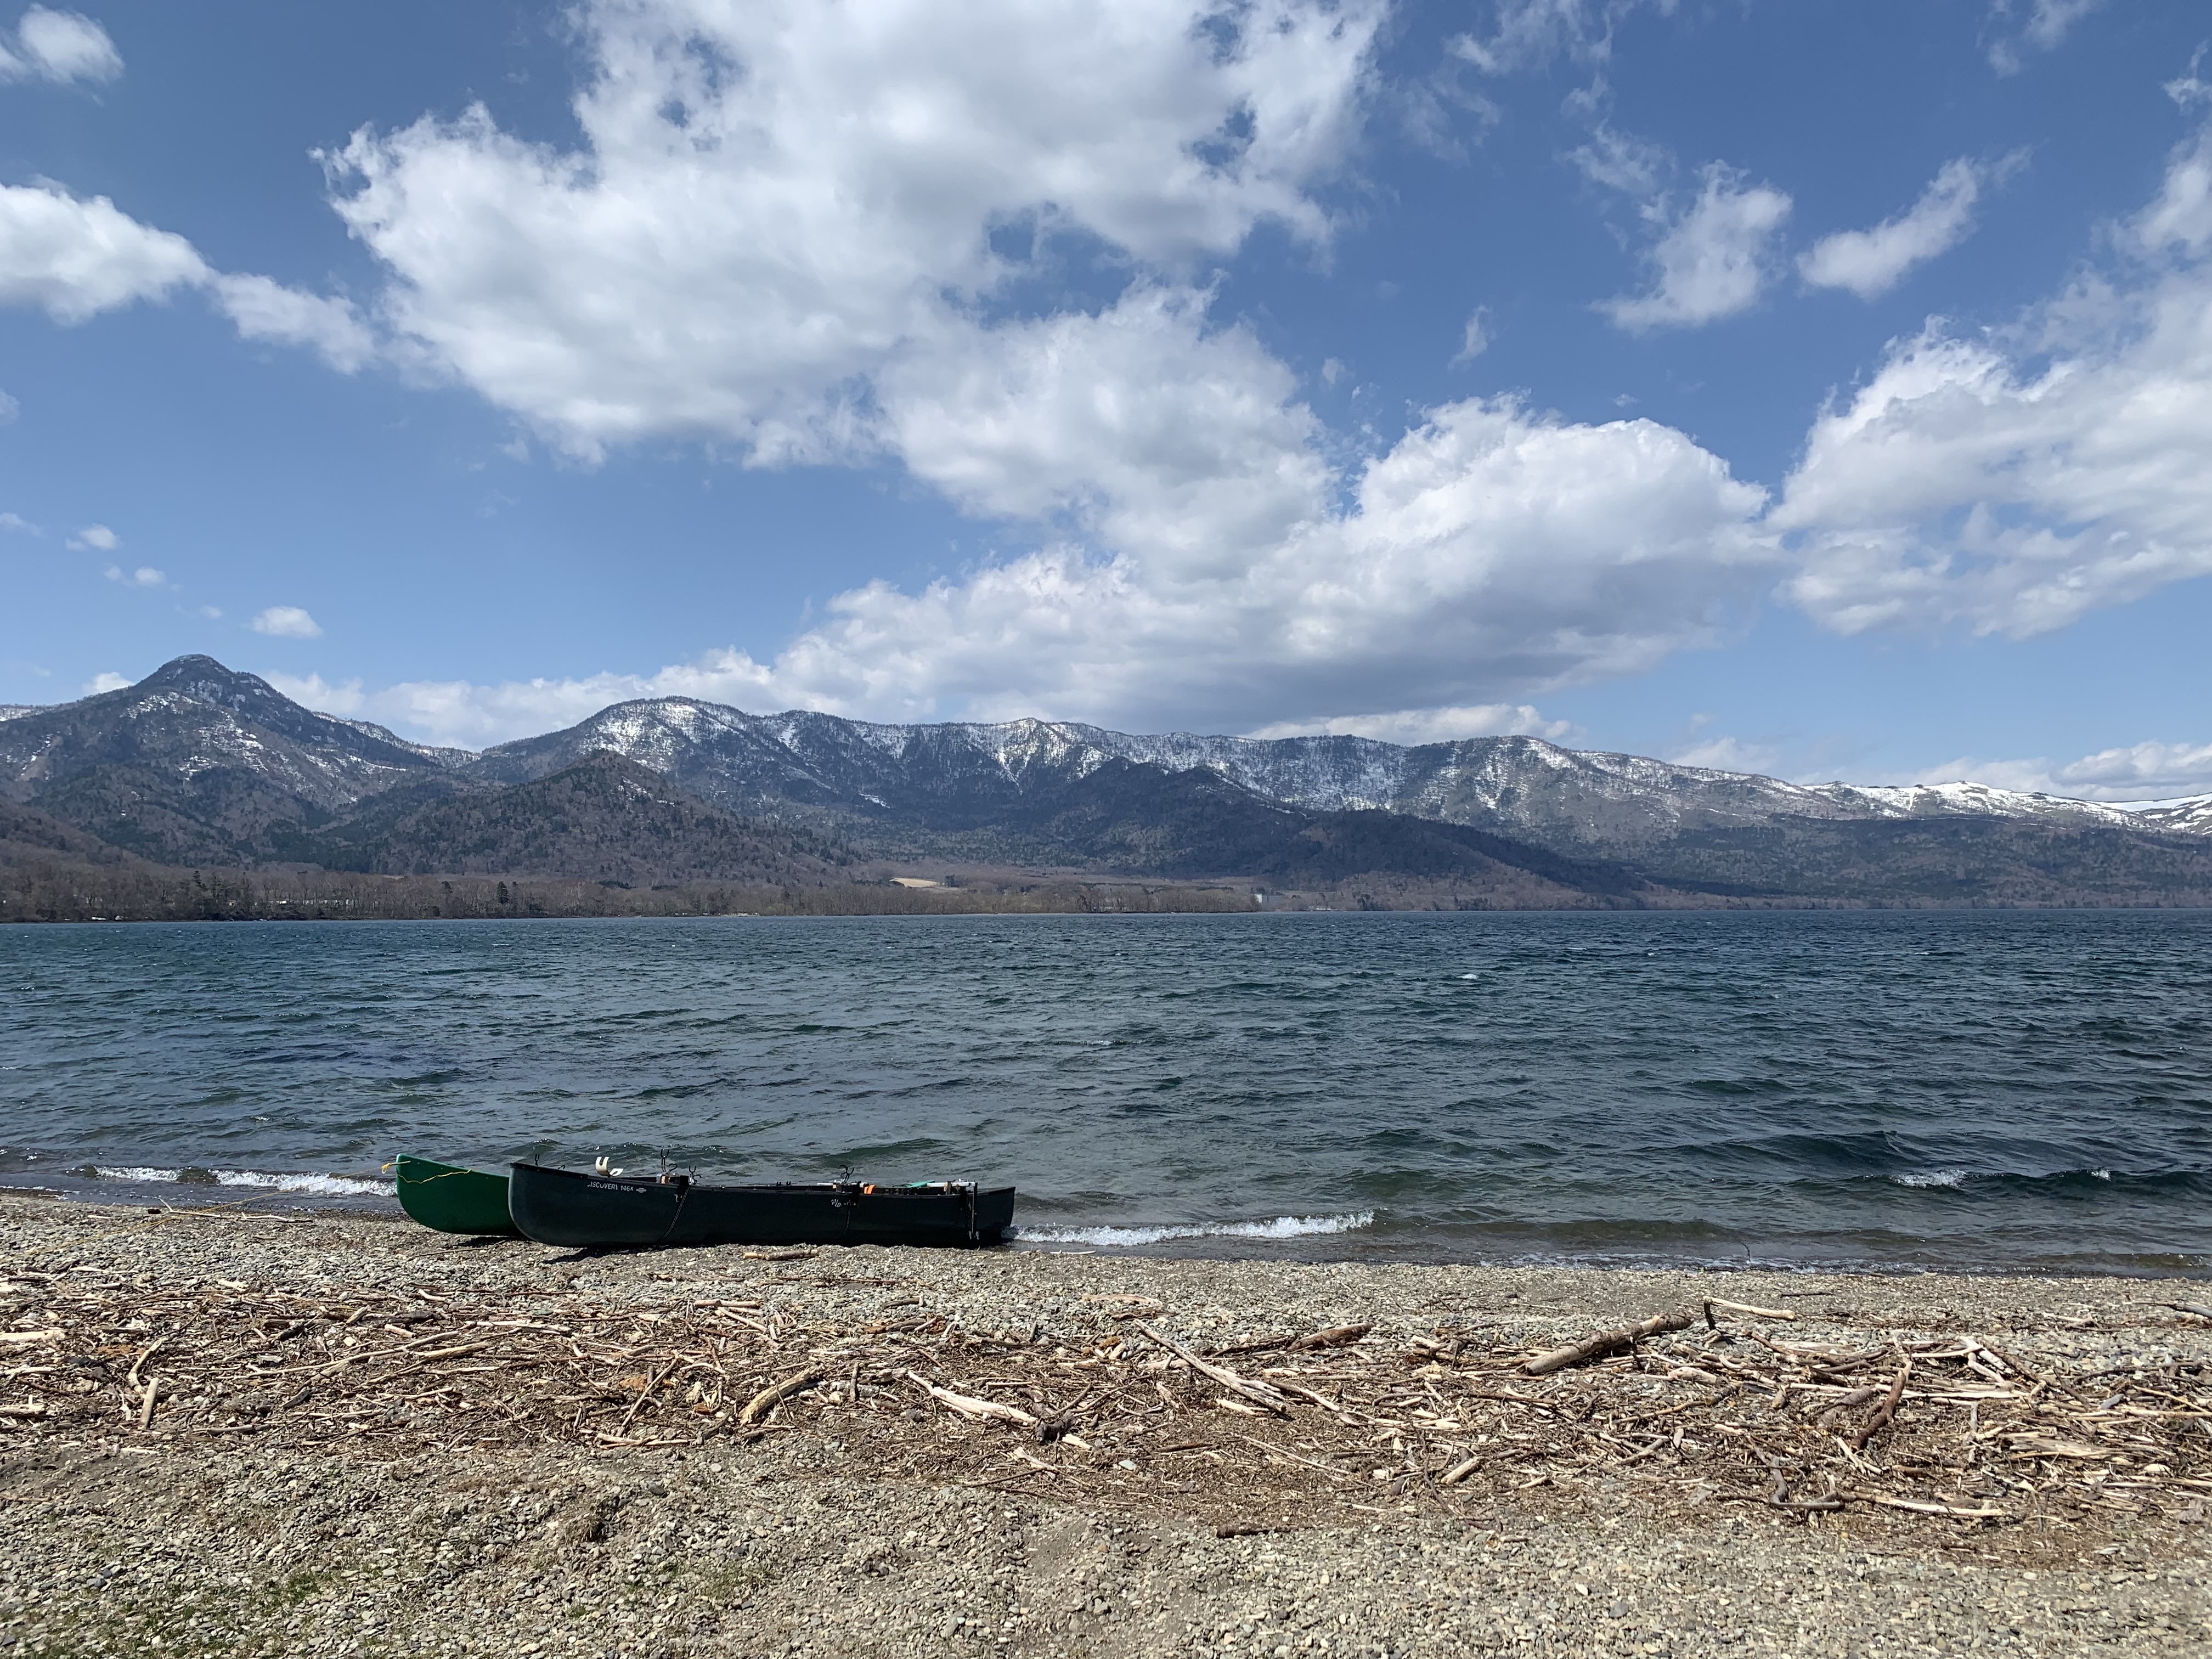 Two canoes on the shore at Sunayu in April